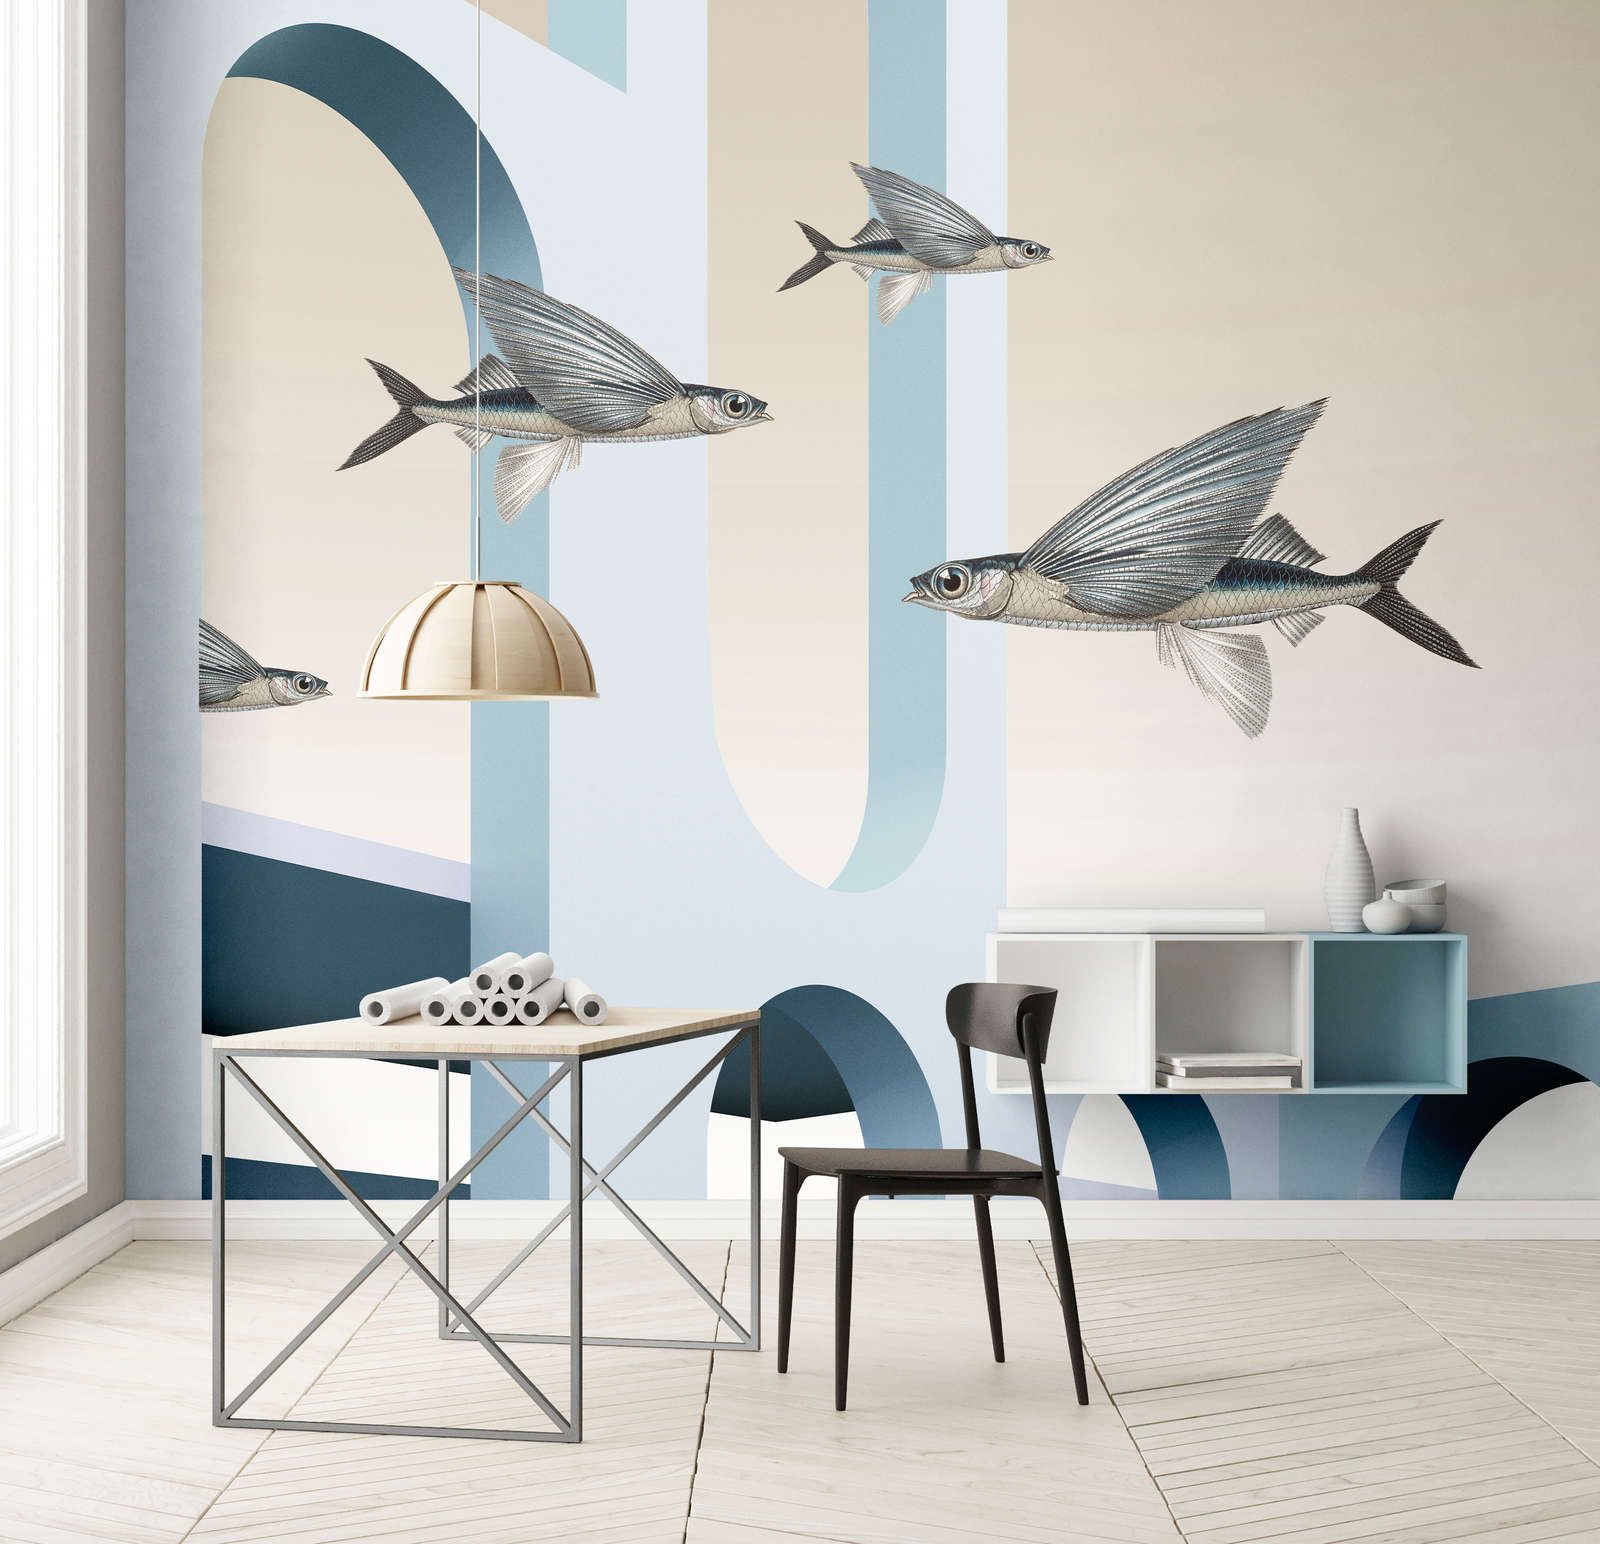             styx - Photo wallpaper with abstract 3D architecture and flying fish - Light textured non-woven
        